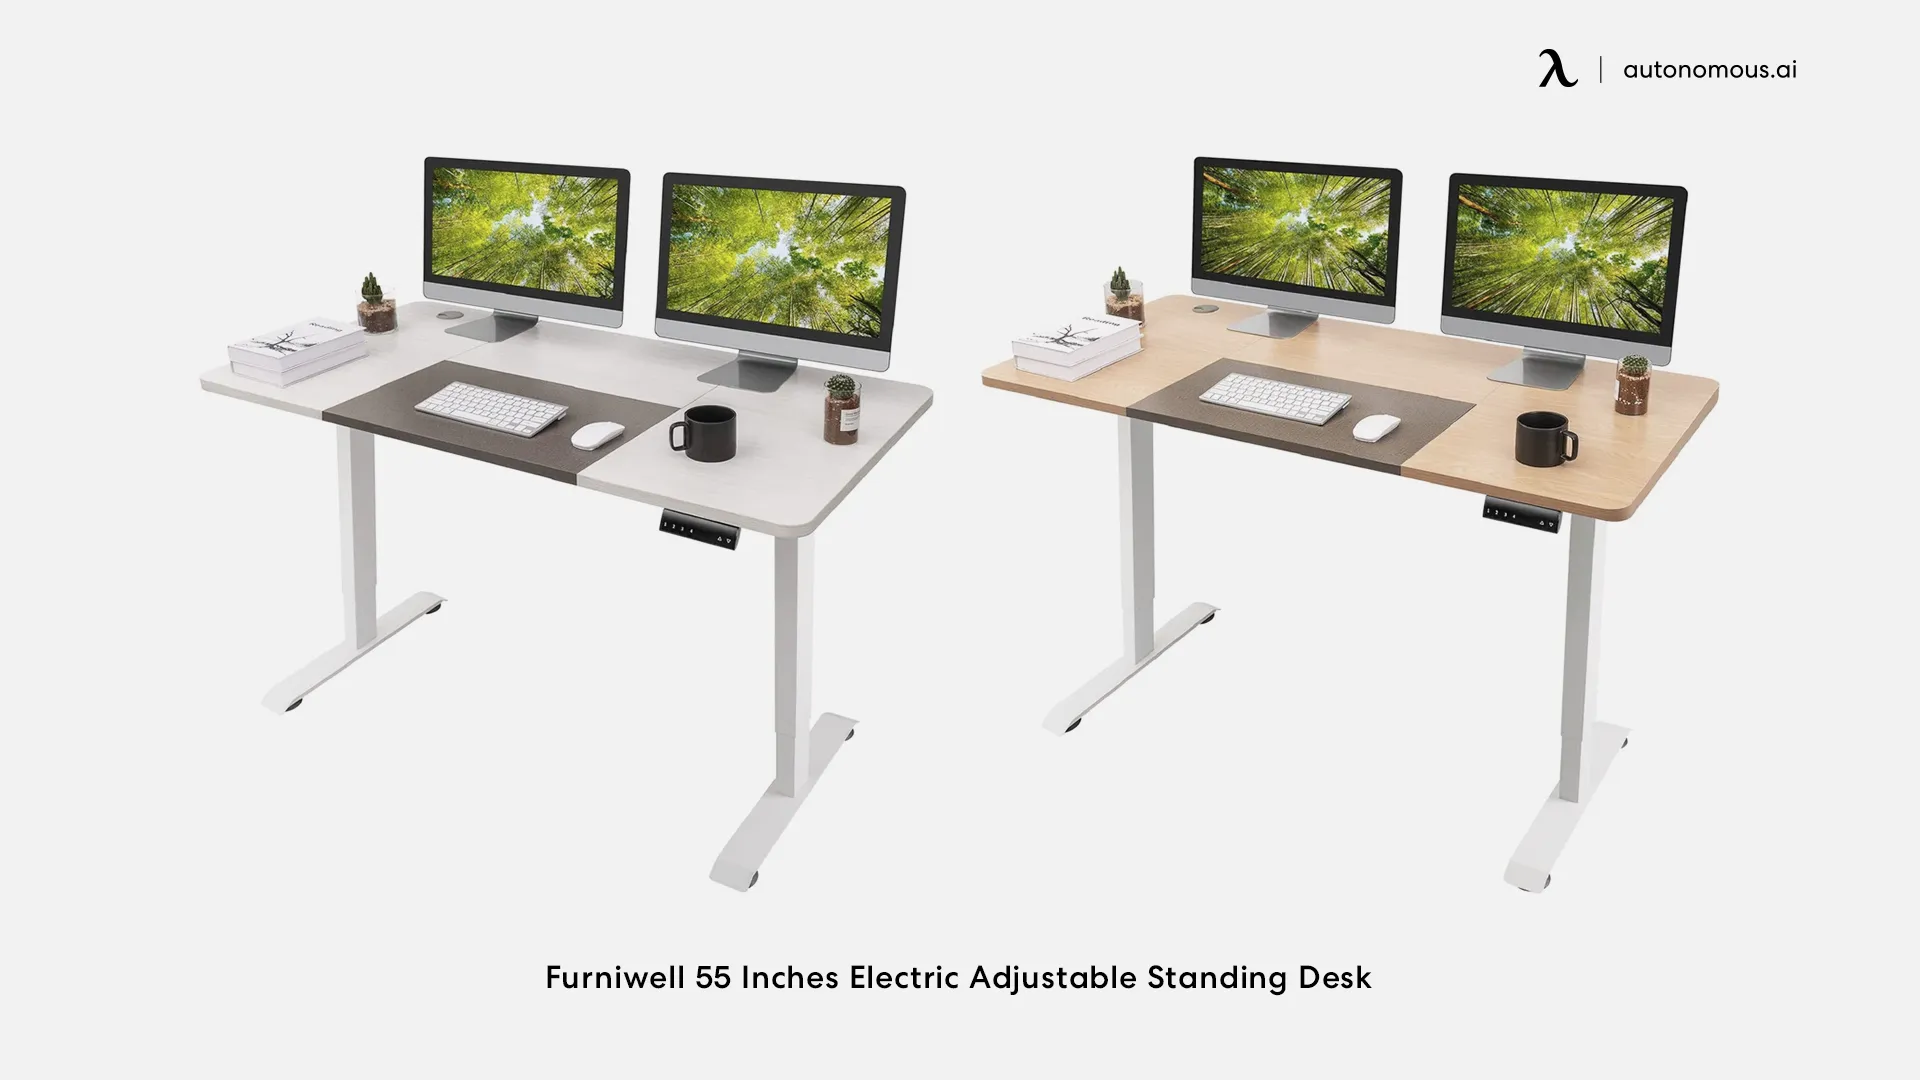 Furniwell 55 Inches Electric Adjustable Standing Desk